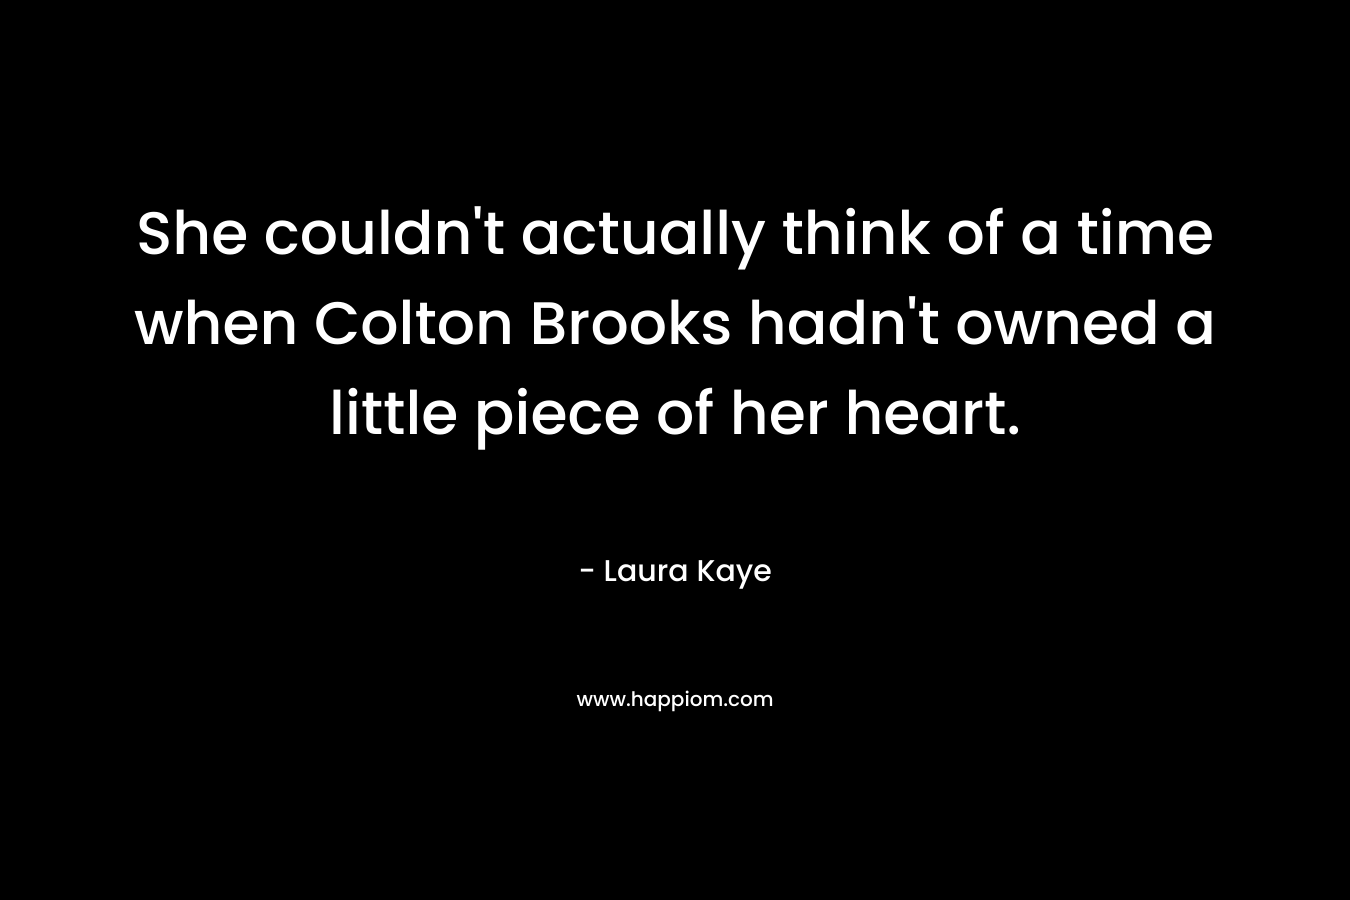 She couldn’t actually think of a time when Colton Brooks hadn’t owned a little piece of her heart. – Laura Kaye